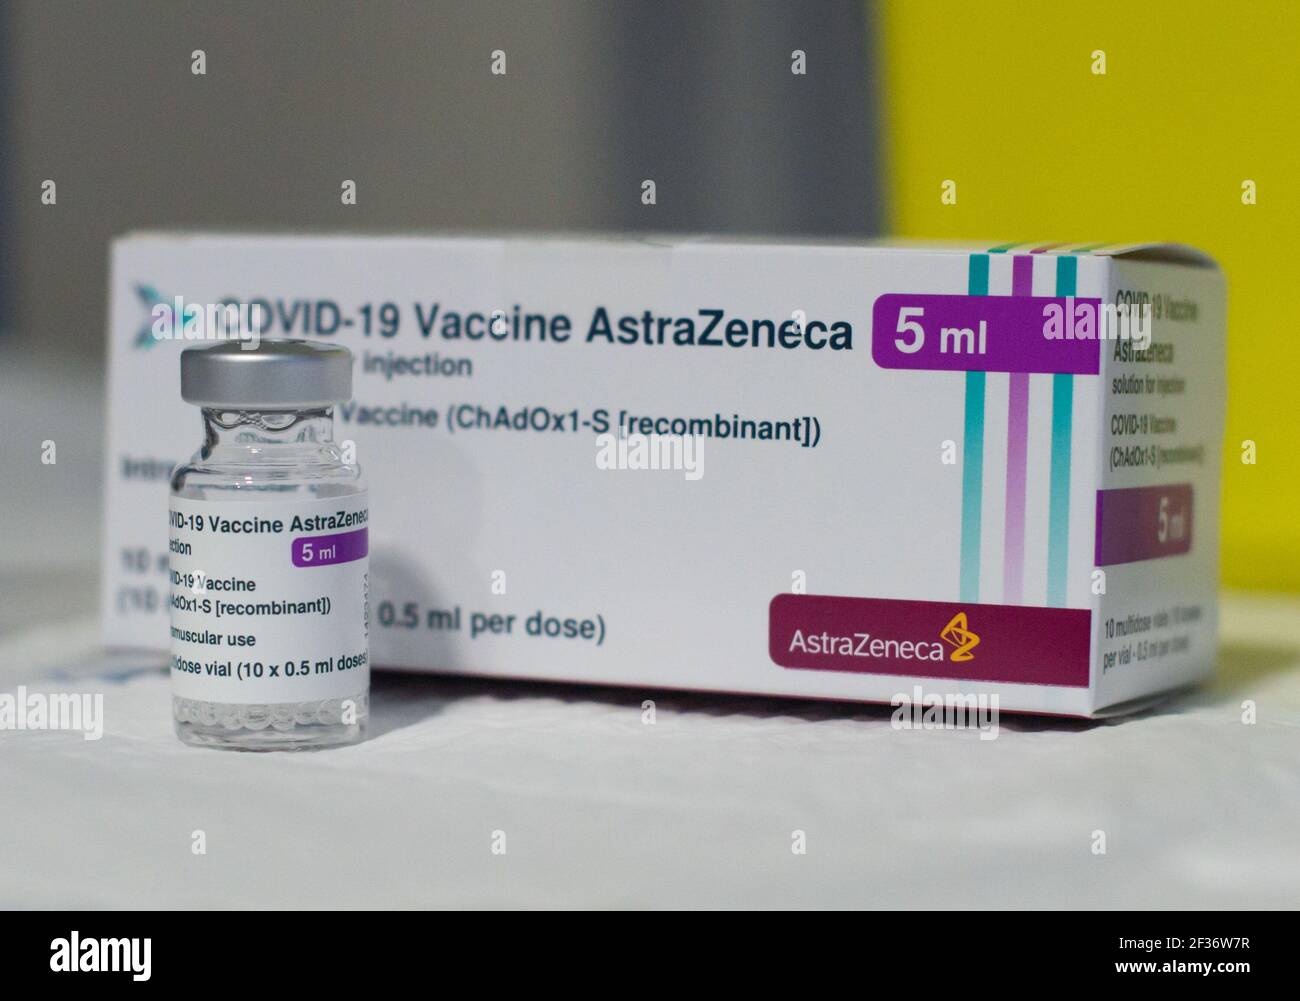 AstraZeneca COVID19 vaccine Vial seen in front of its packaging box during the vaccination exercise of frontline workers at Coria City Hospital. Some European countries have cancelled the administration of AstraZeneca vaccine due the appearance of some side effects in people who had received it recently. Stock Photo